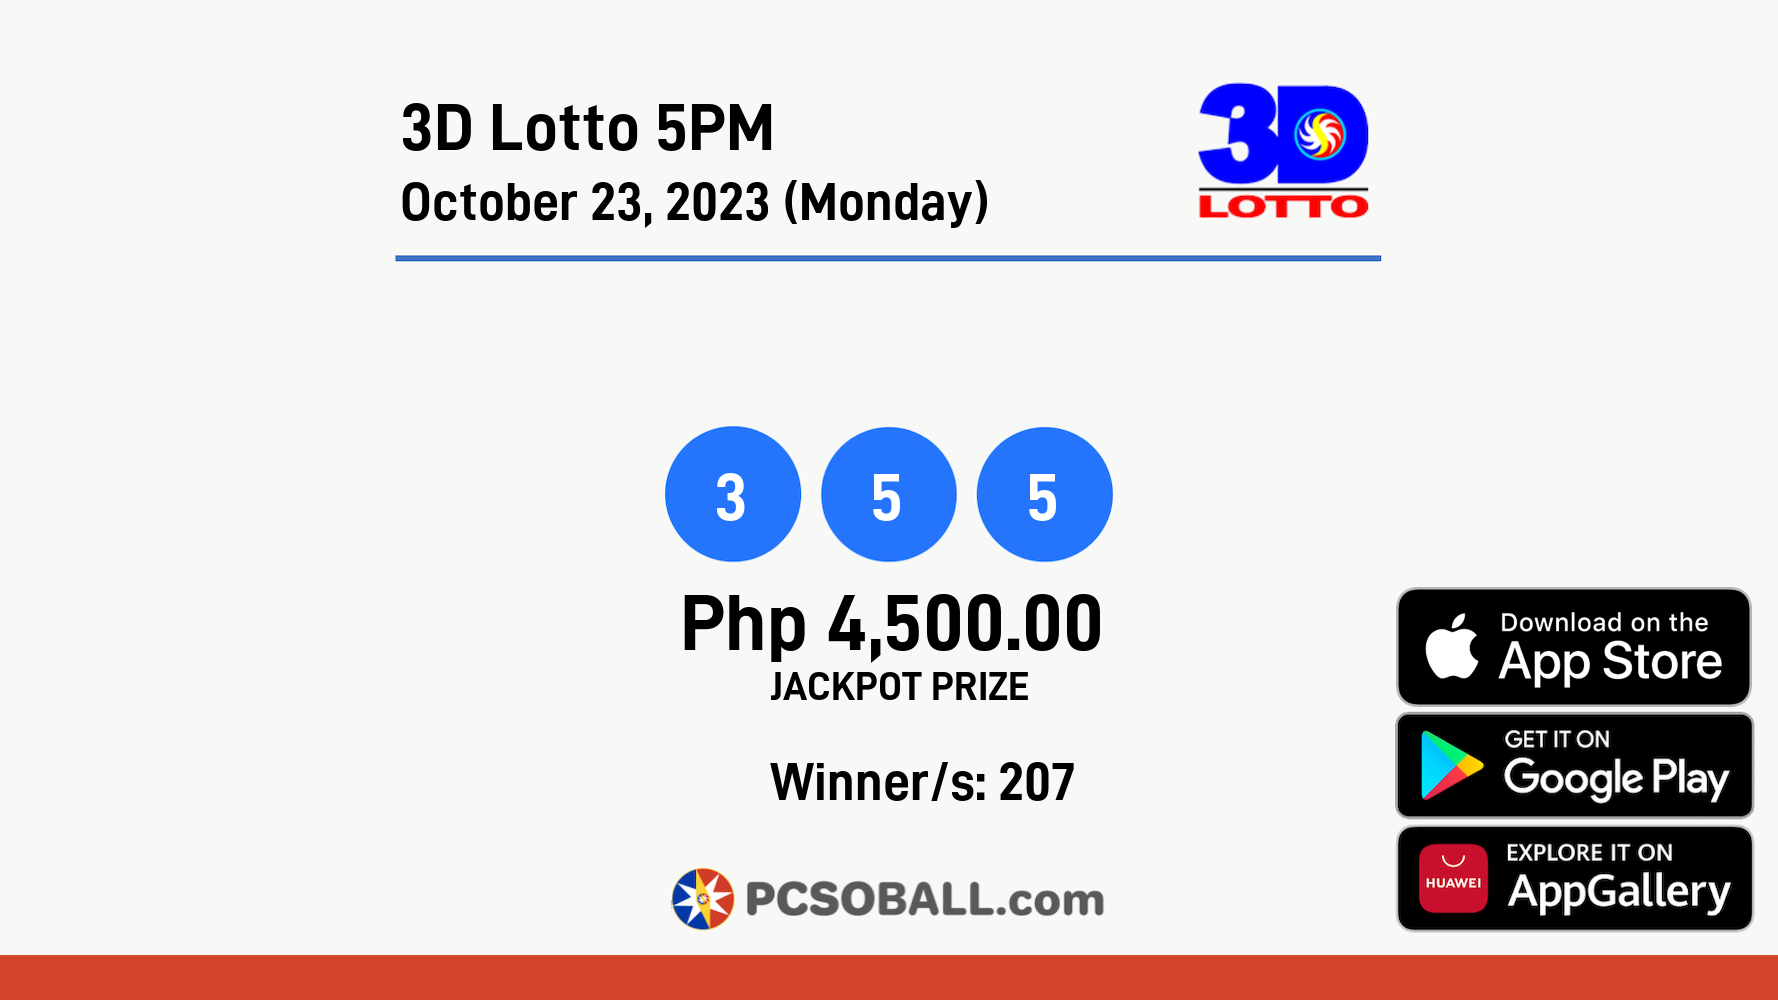 3D Lotto 5PM October 23, 2023 (Monday) Result